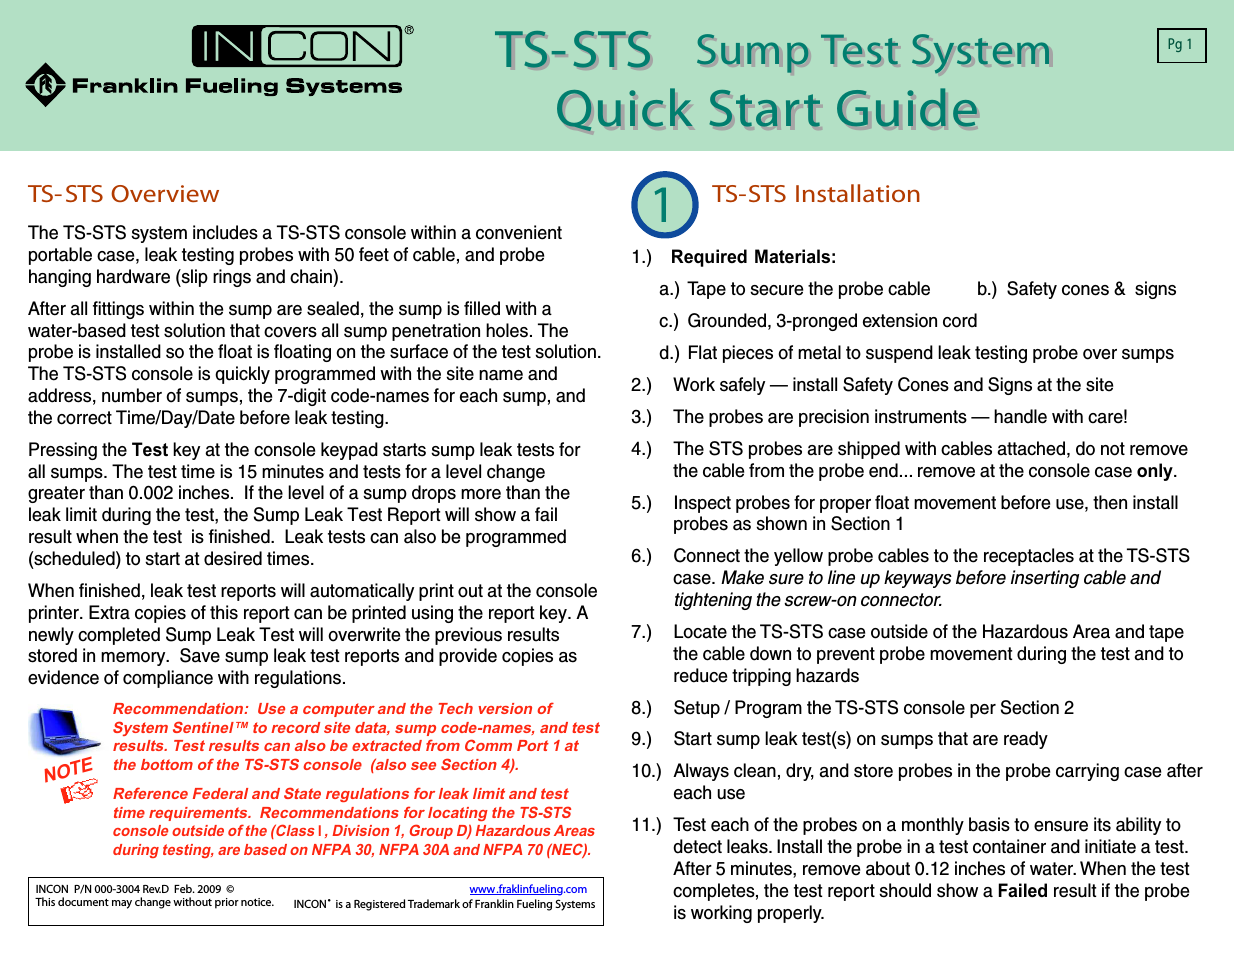 TS-STS Sump Test System Kit